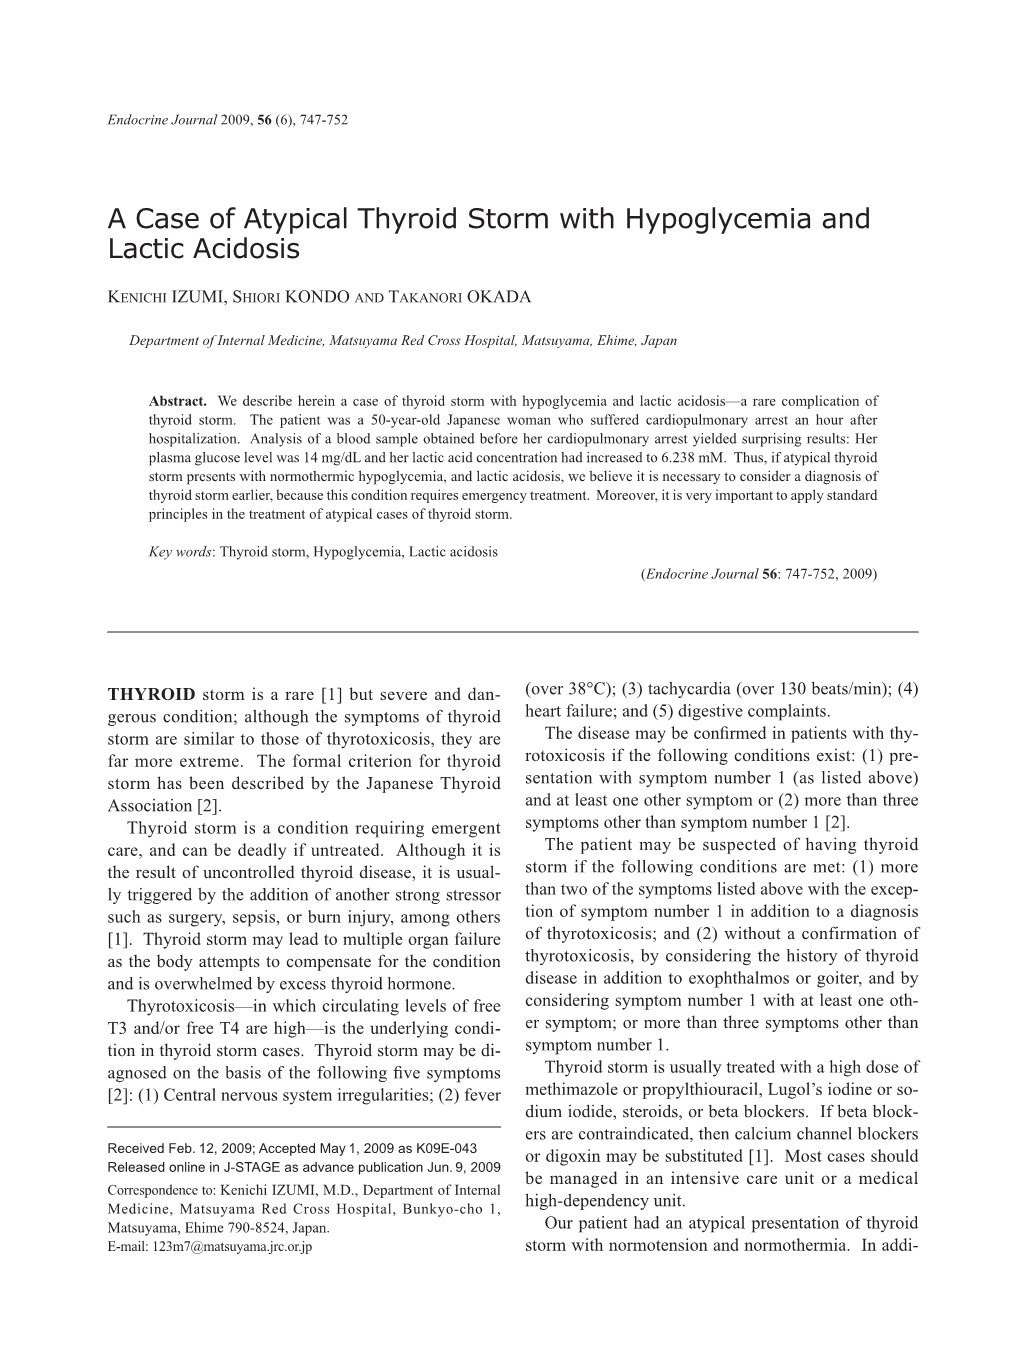 A Case of Atypical Thyroid Storm with Hypoglycemia and Lactic Acidosis